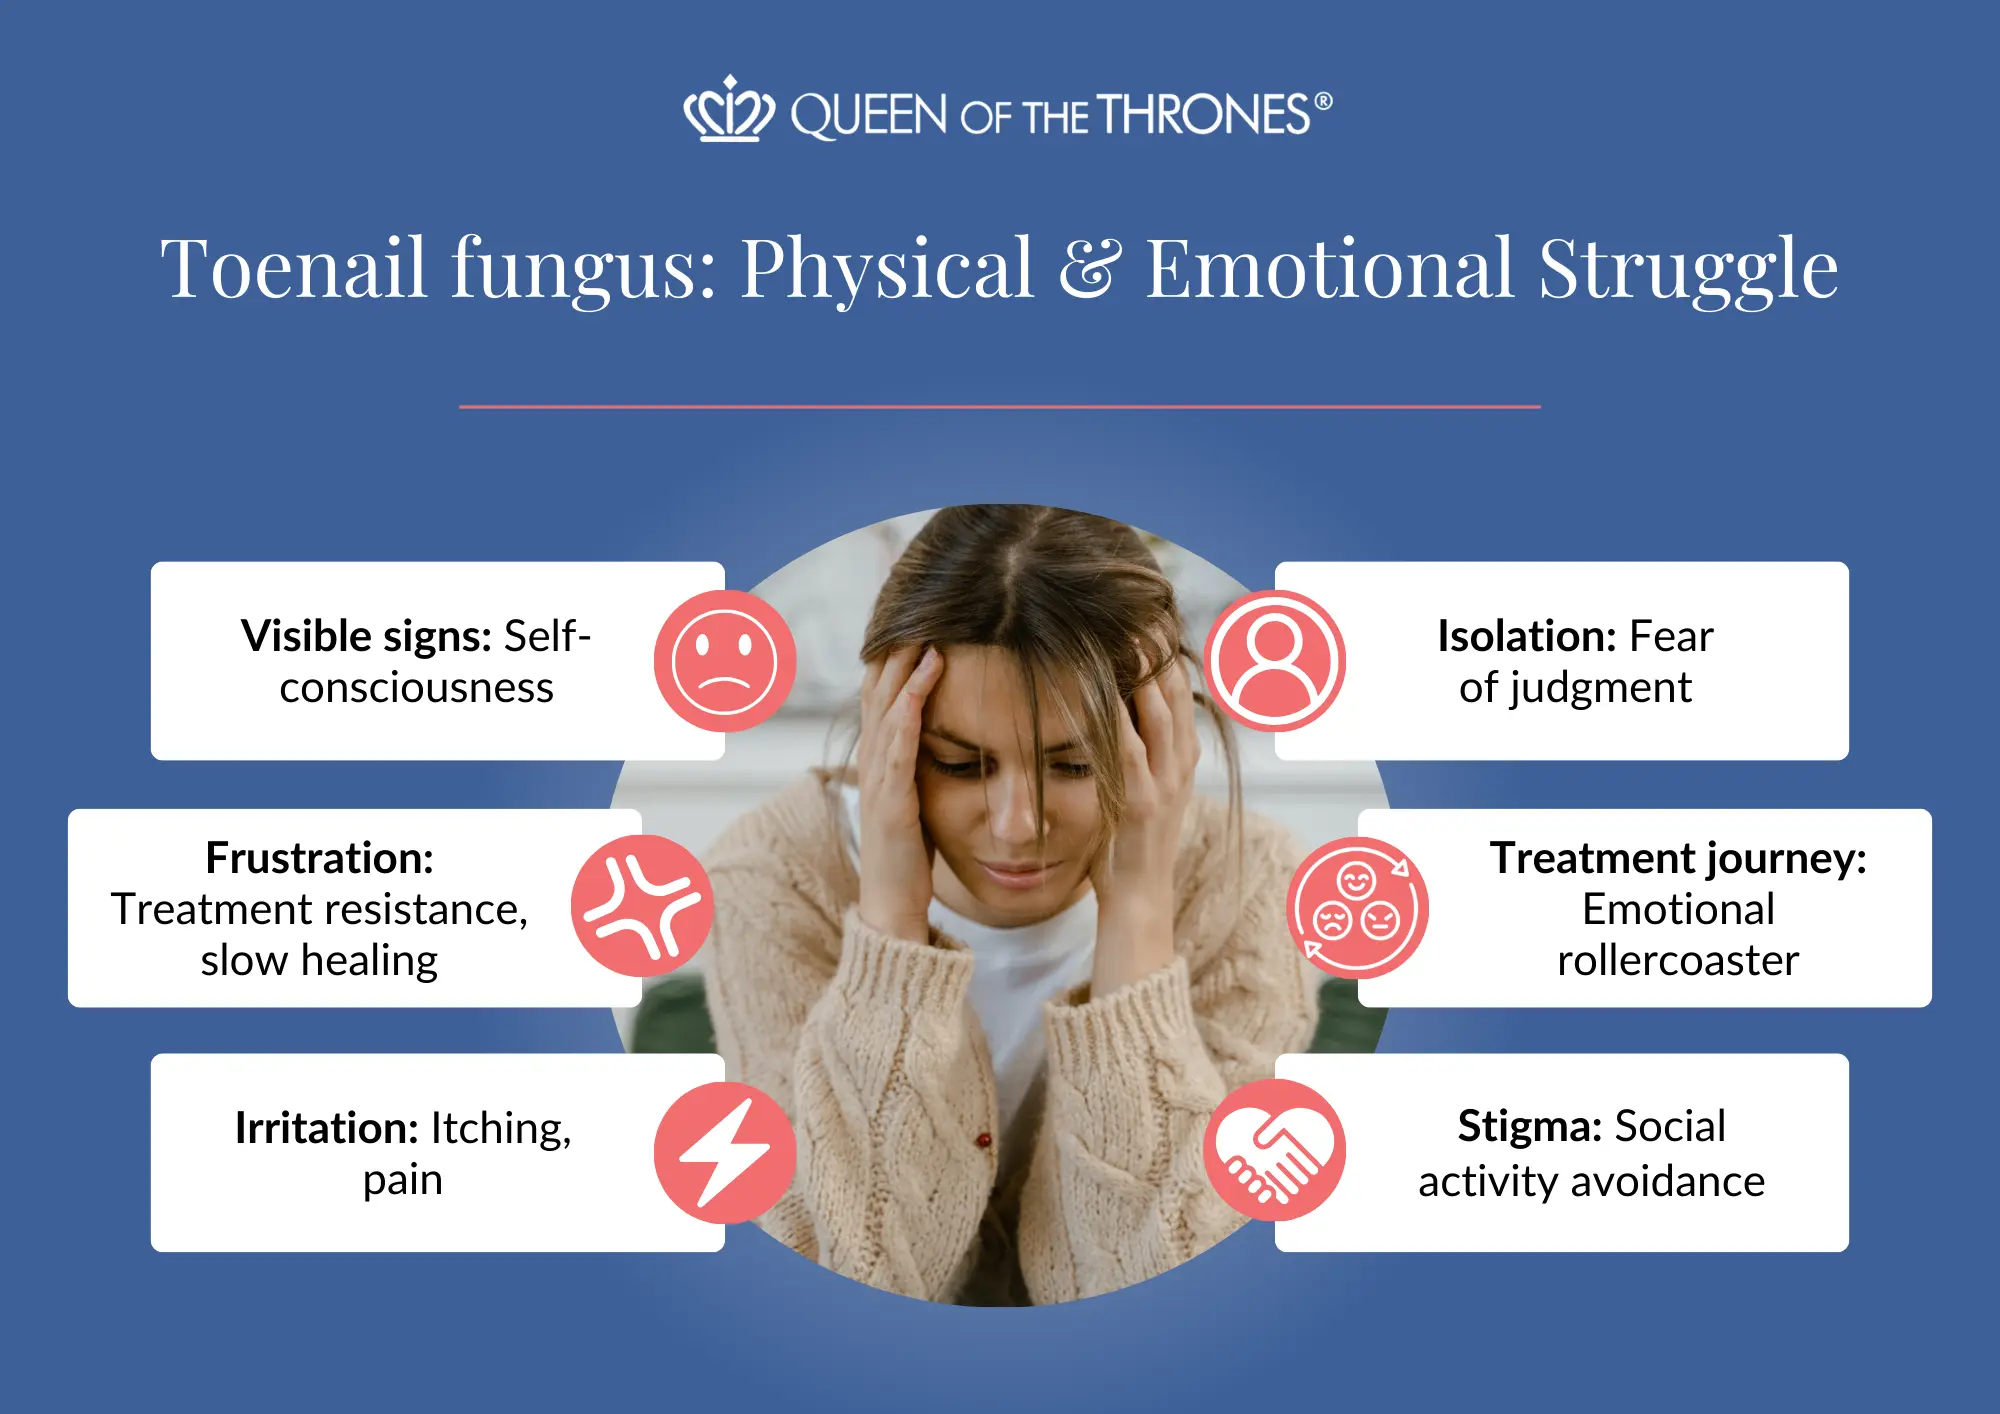 Physical and emotional struggles of toe nail fungus by Queen of the Thrones